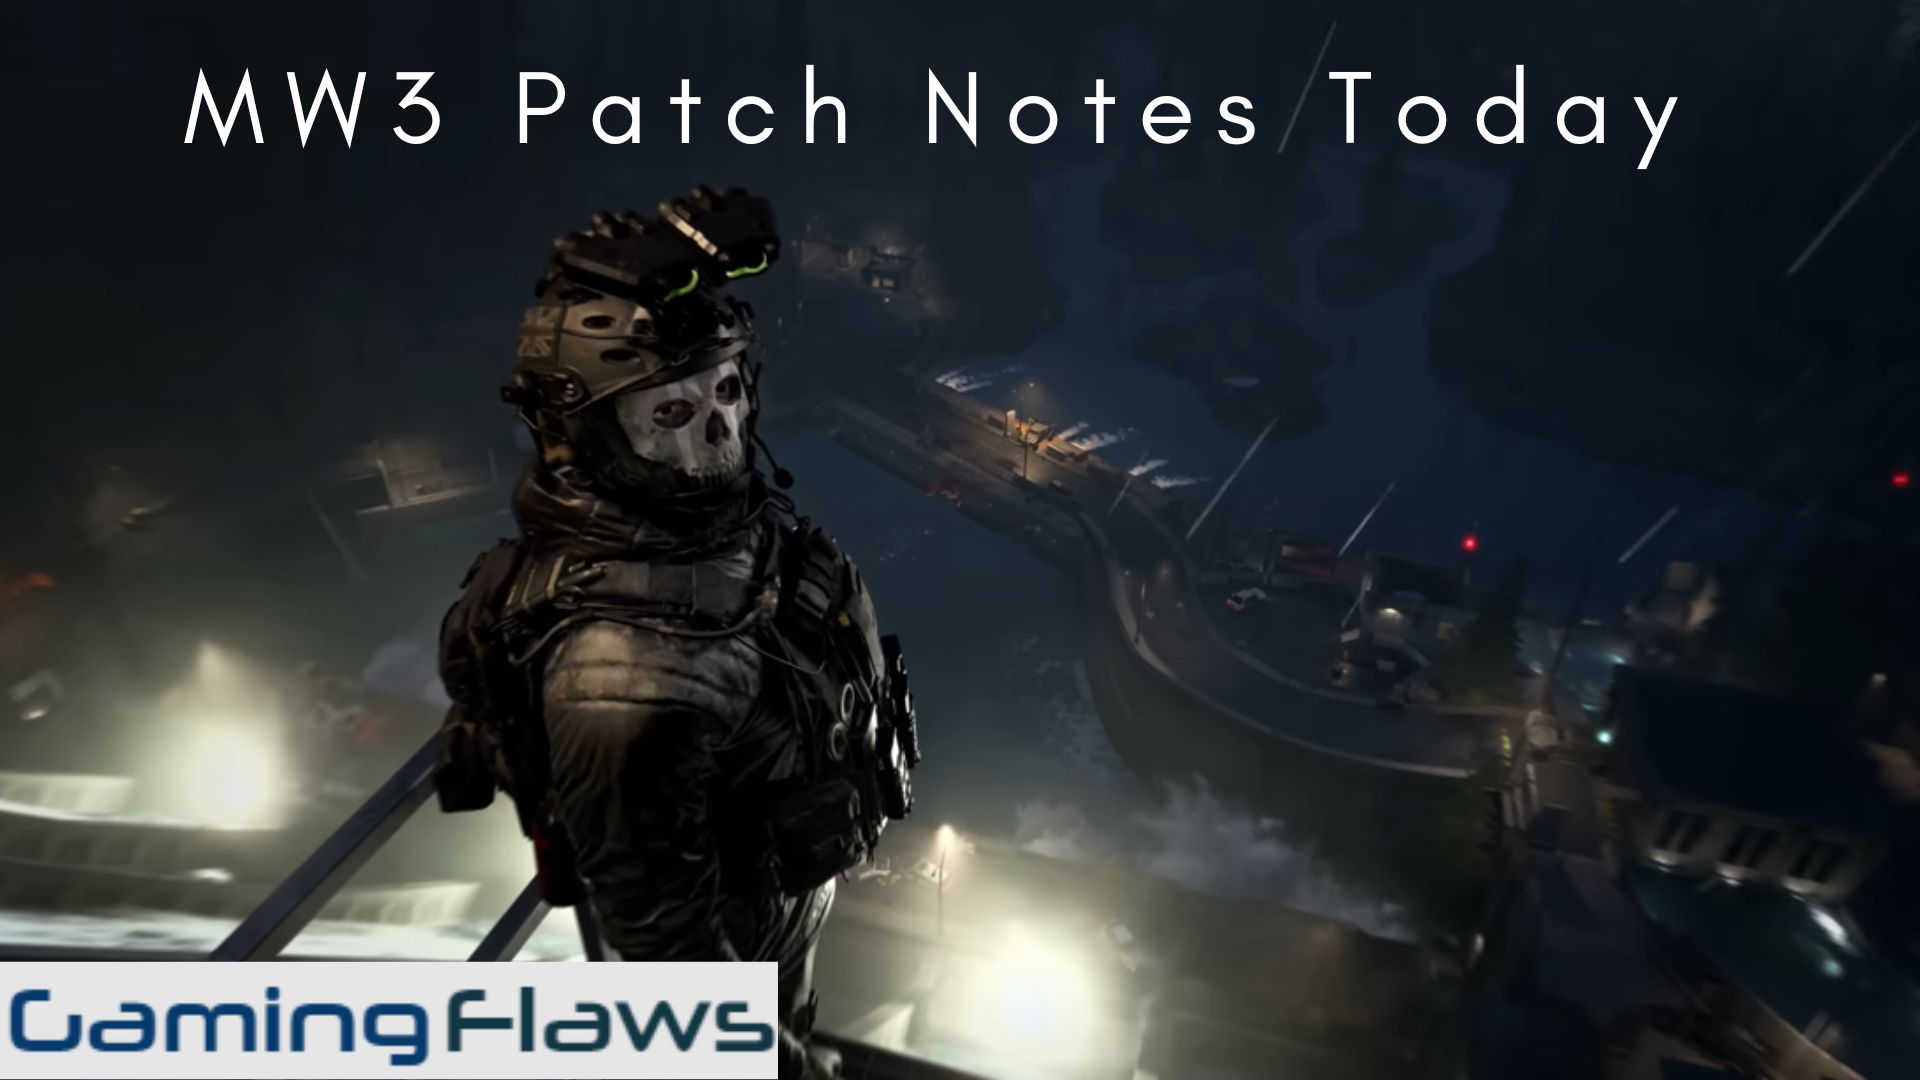 MW3 Patch Notes Today